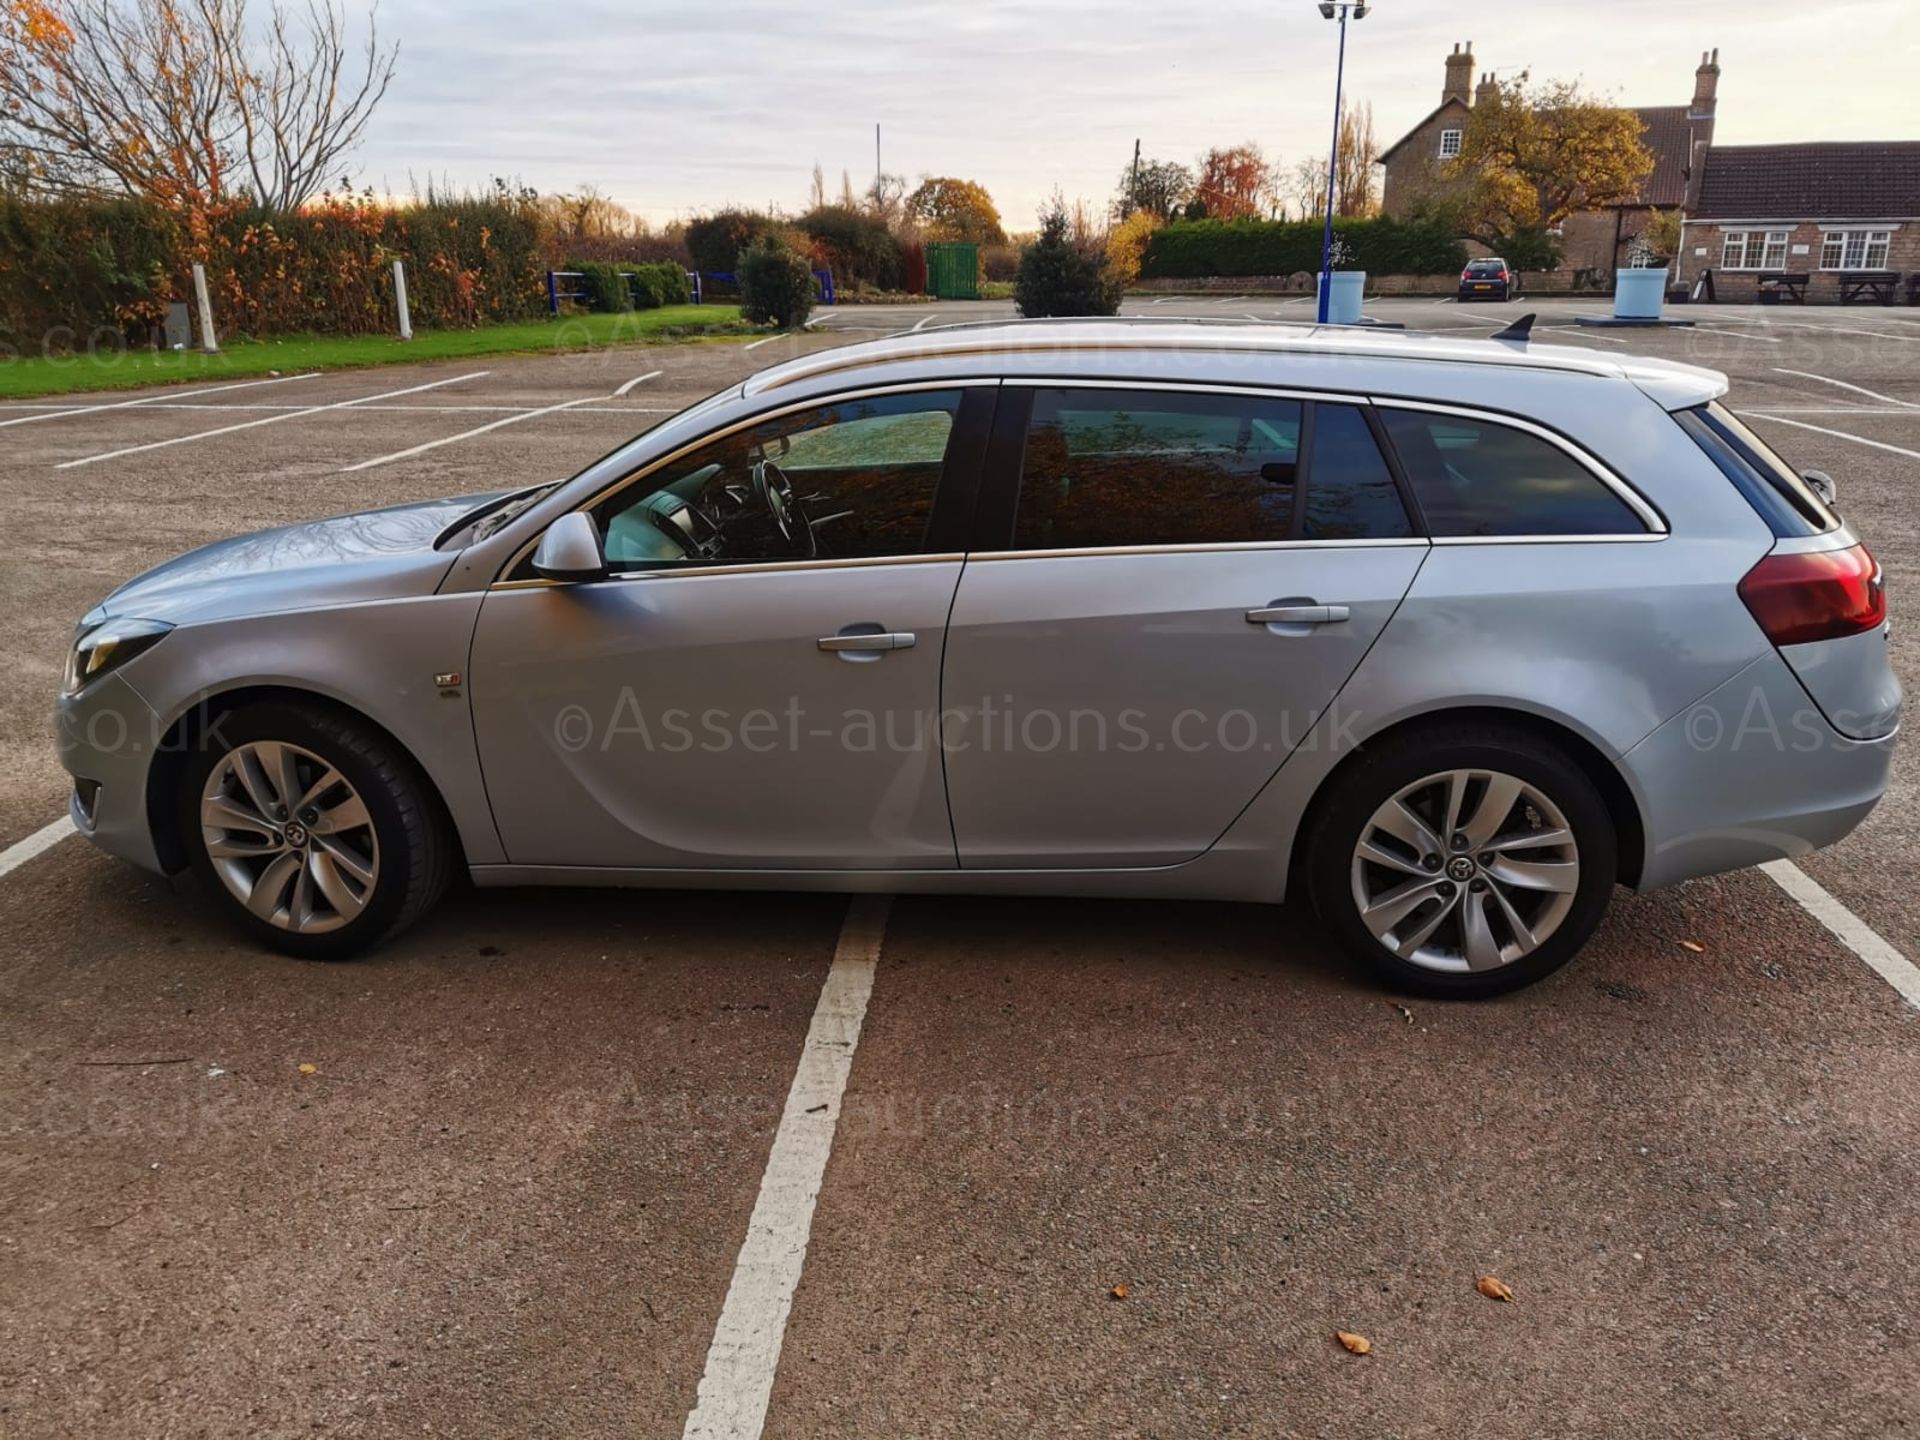 2014 VAUXHALL INSIGNIA ELITE NAV CDTI ECO SS SILVER ESTATE, 2.0 DIESEL, 115,110 MILES WITH FSH - Image 4 of 33